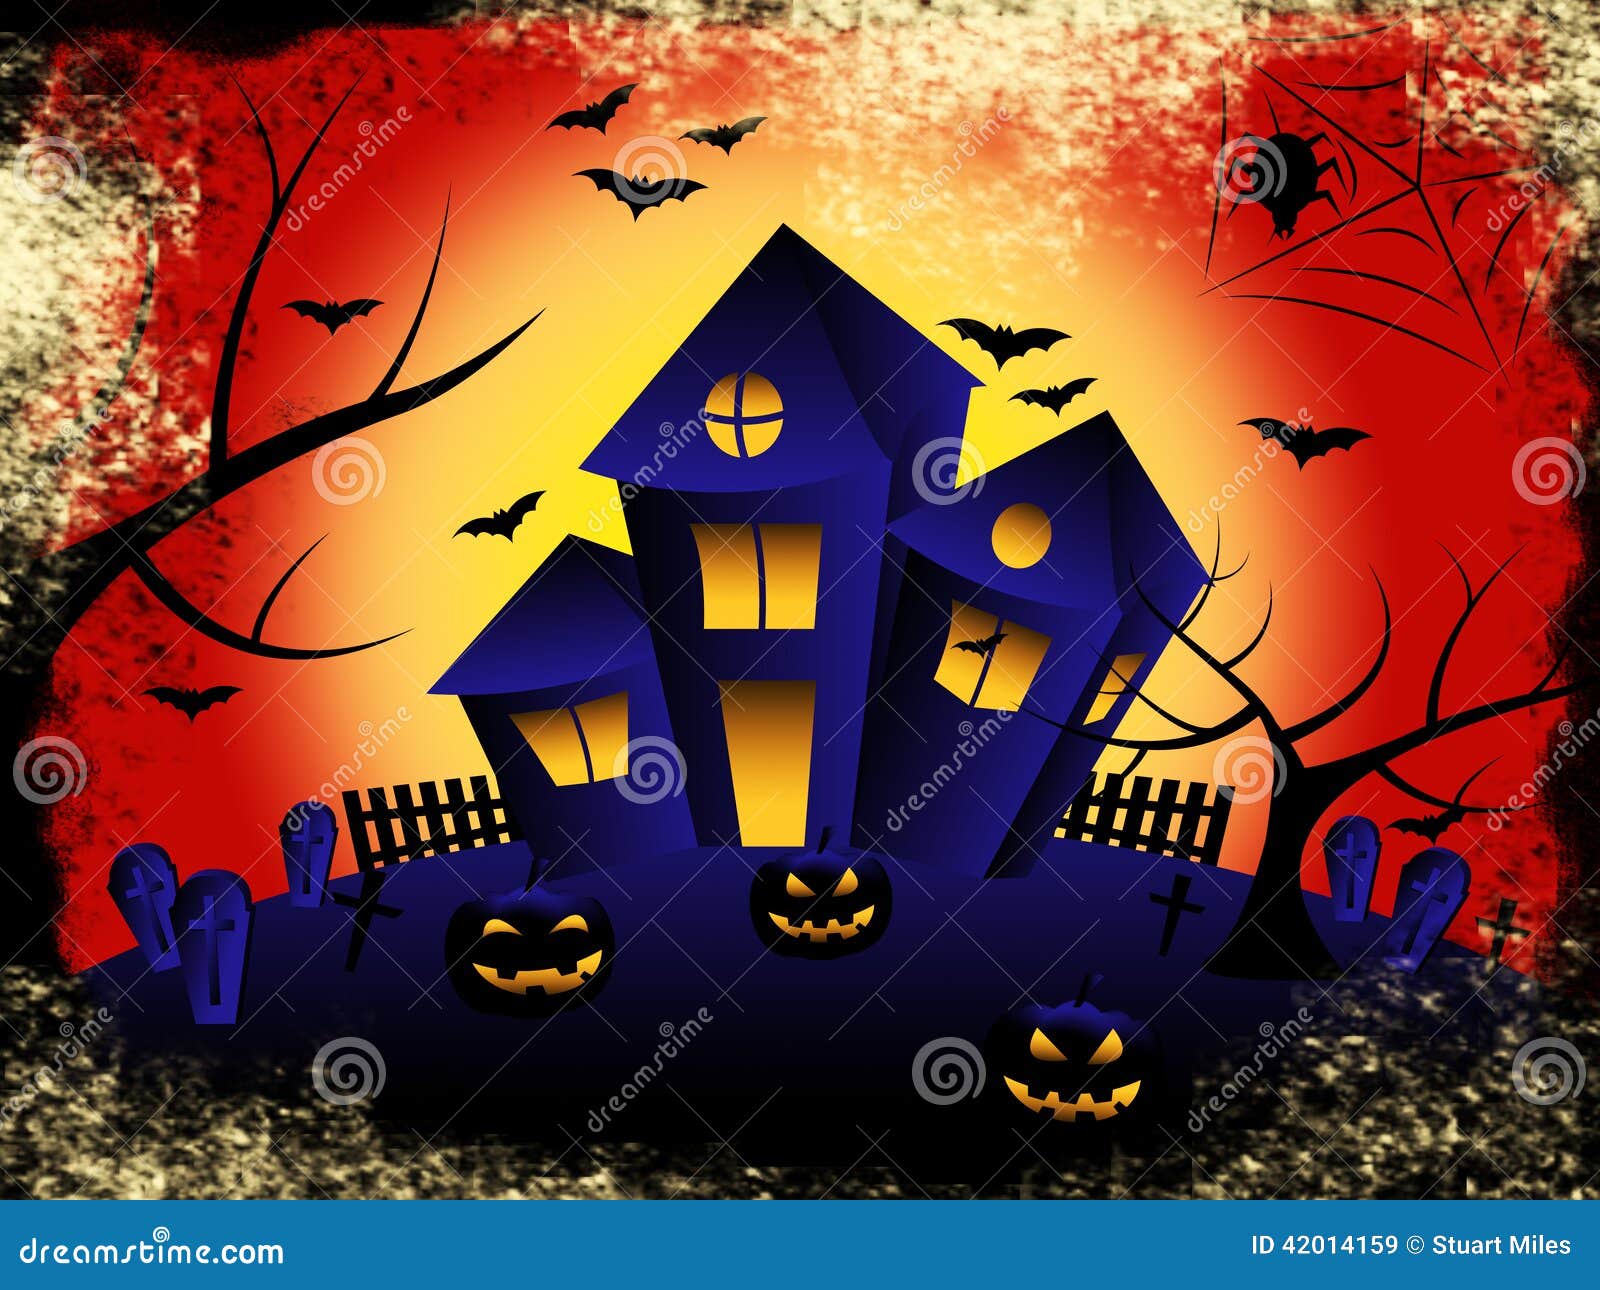 Haunted House Shows Trick Or Treat And Celebration Stock 